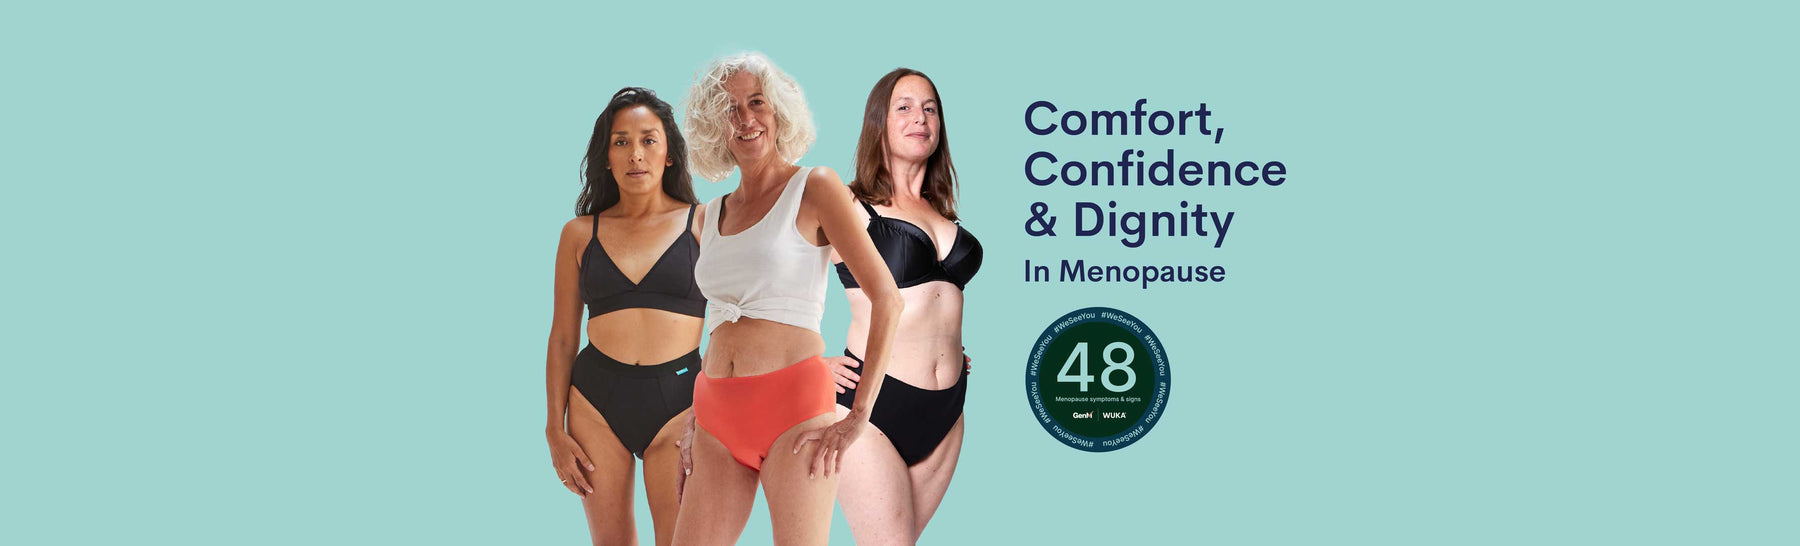 Comfort, confidence and dignity in menopause with WUKA period and incontinence pants